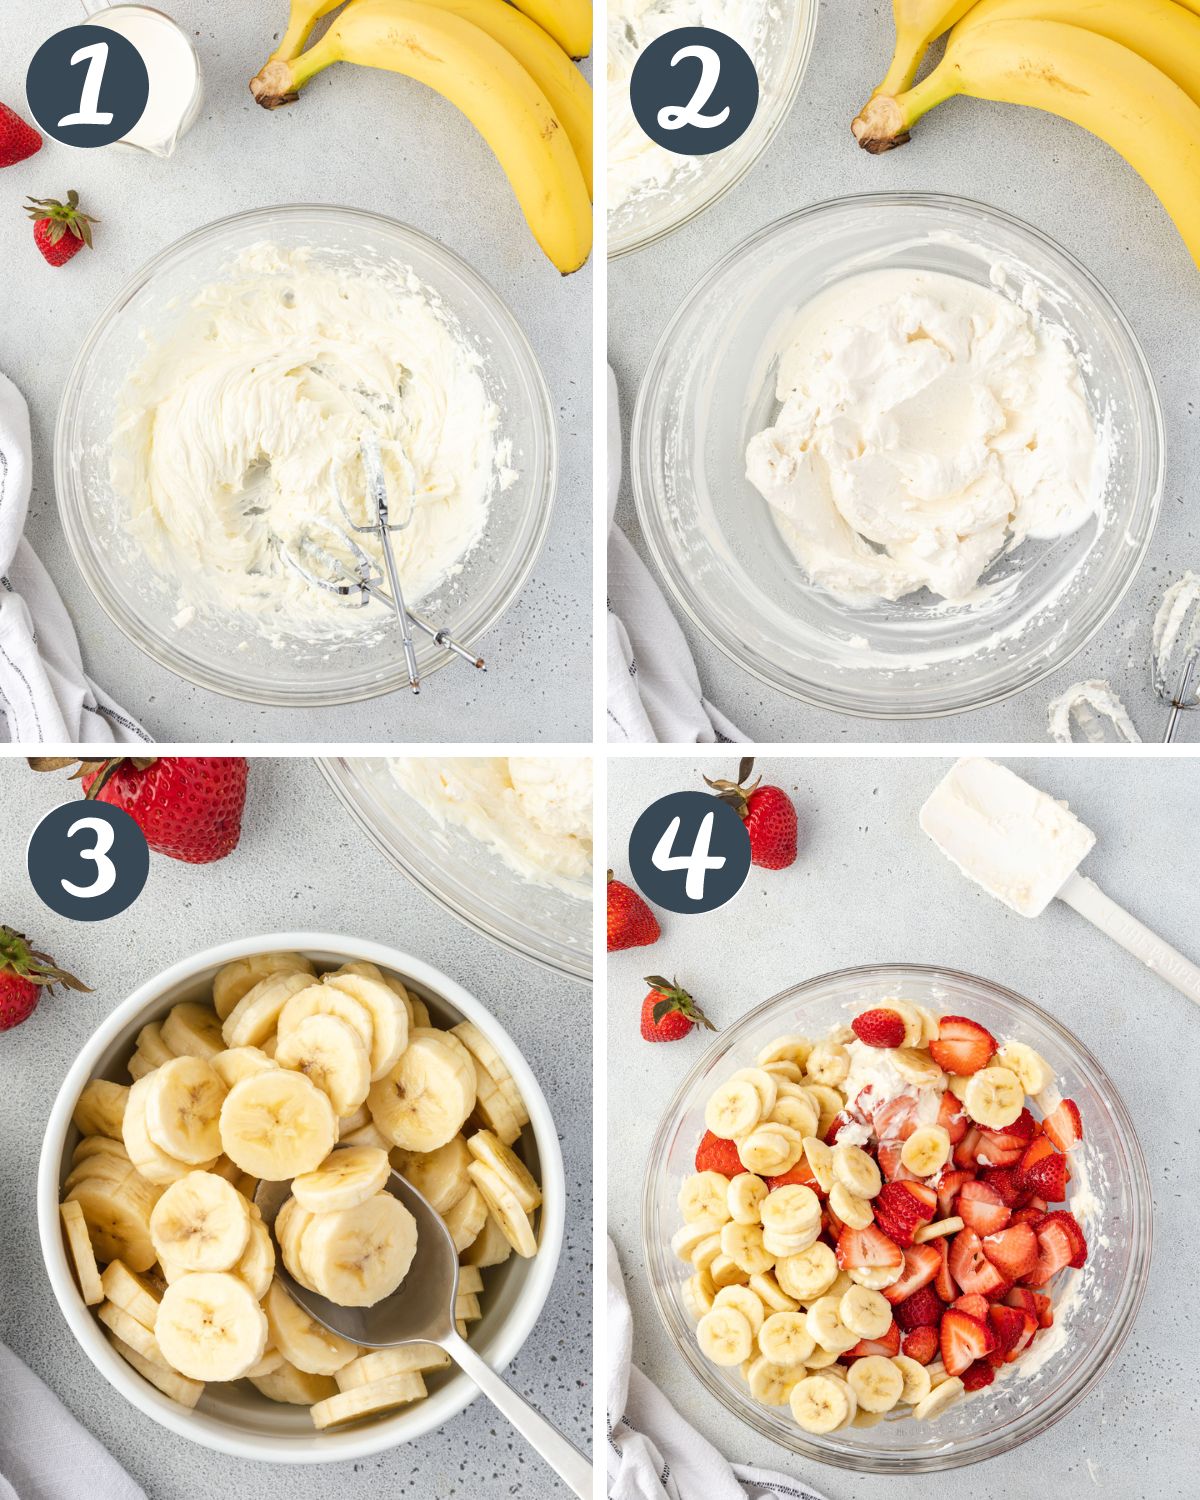 4 images showing the steps of how to make this recipe.